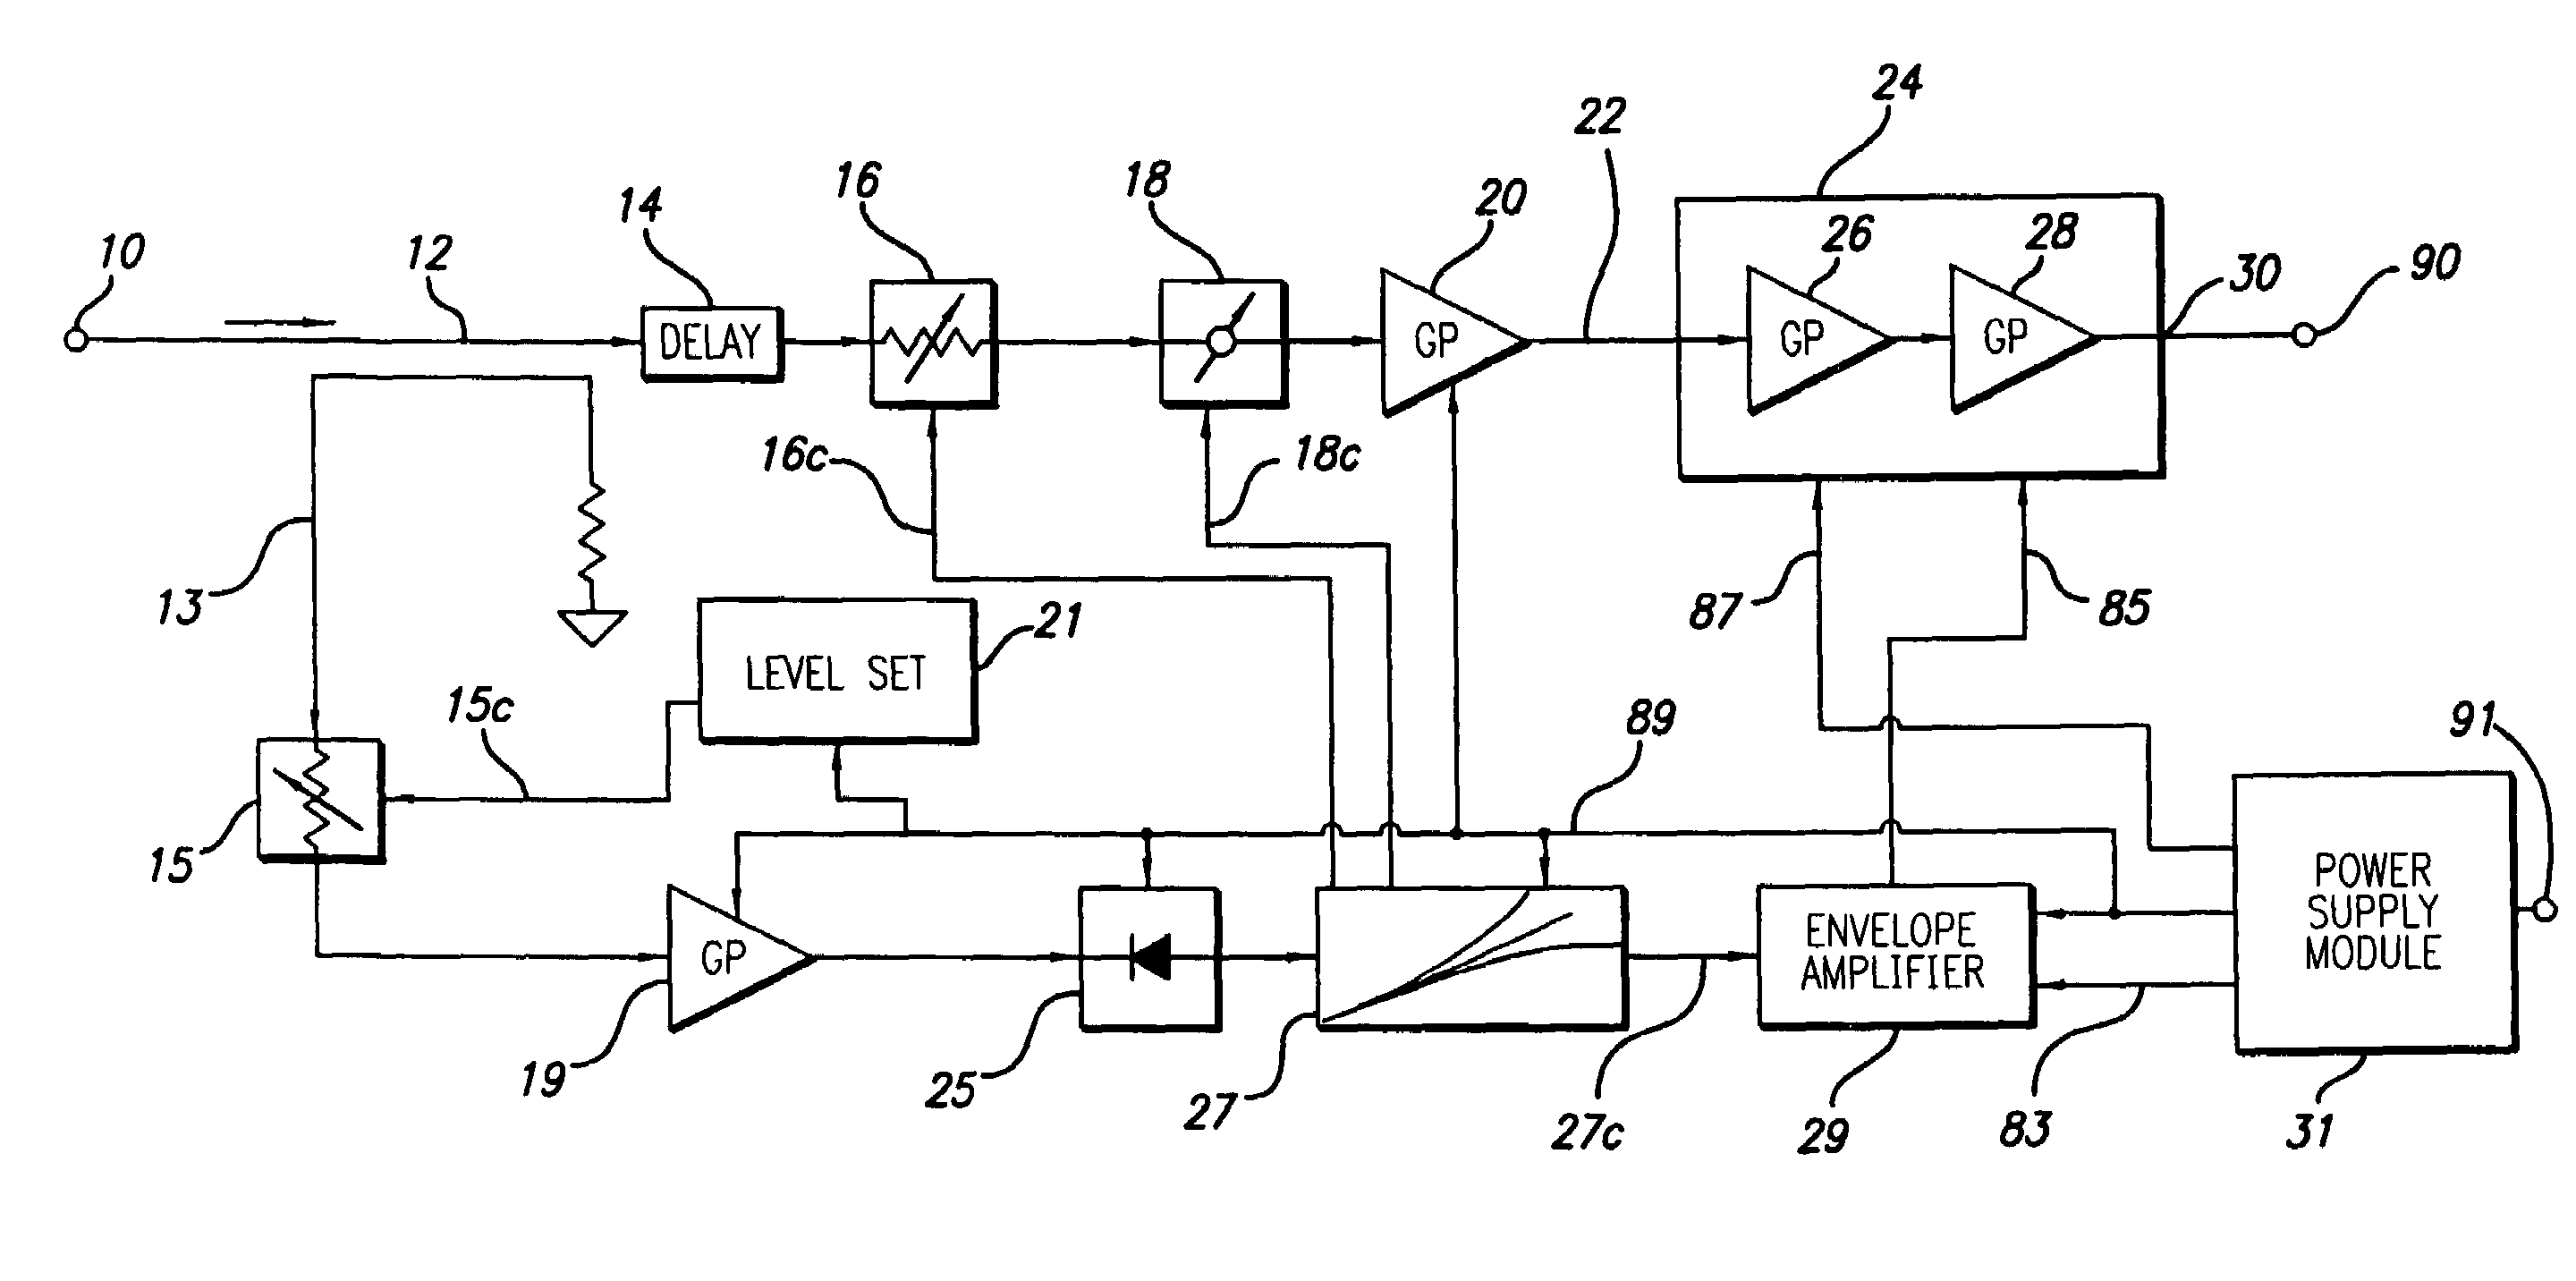 Constant gain nonlinear envelope tracking high efficiency linear amplifier